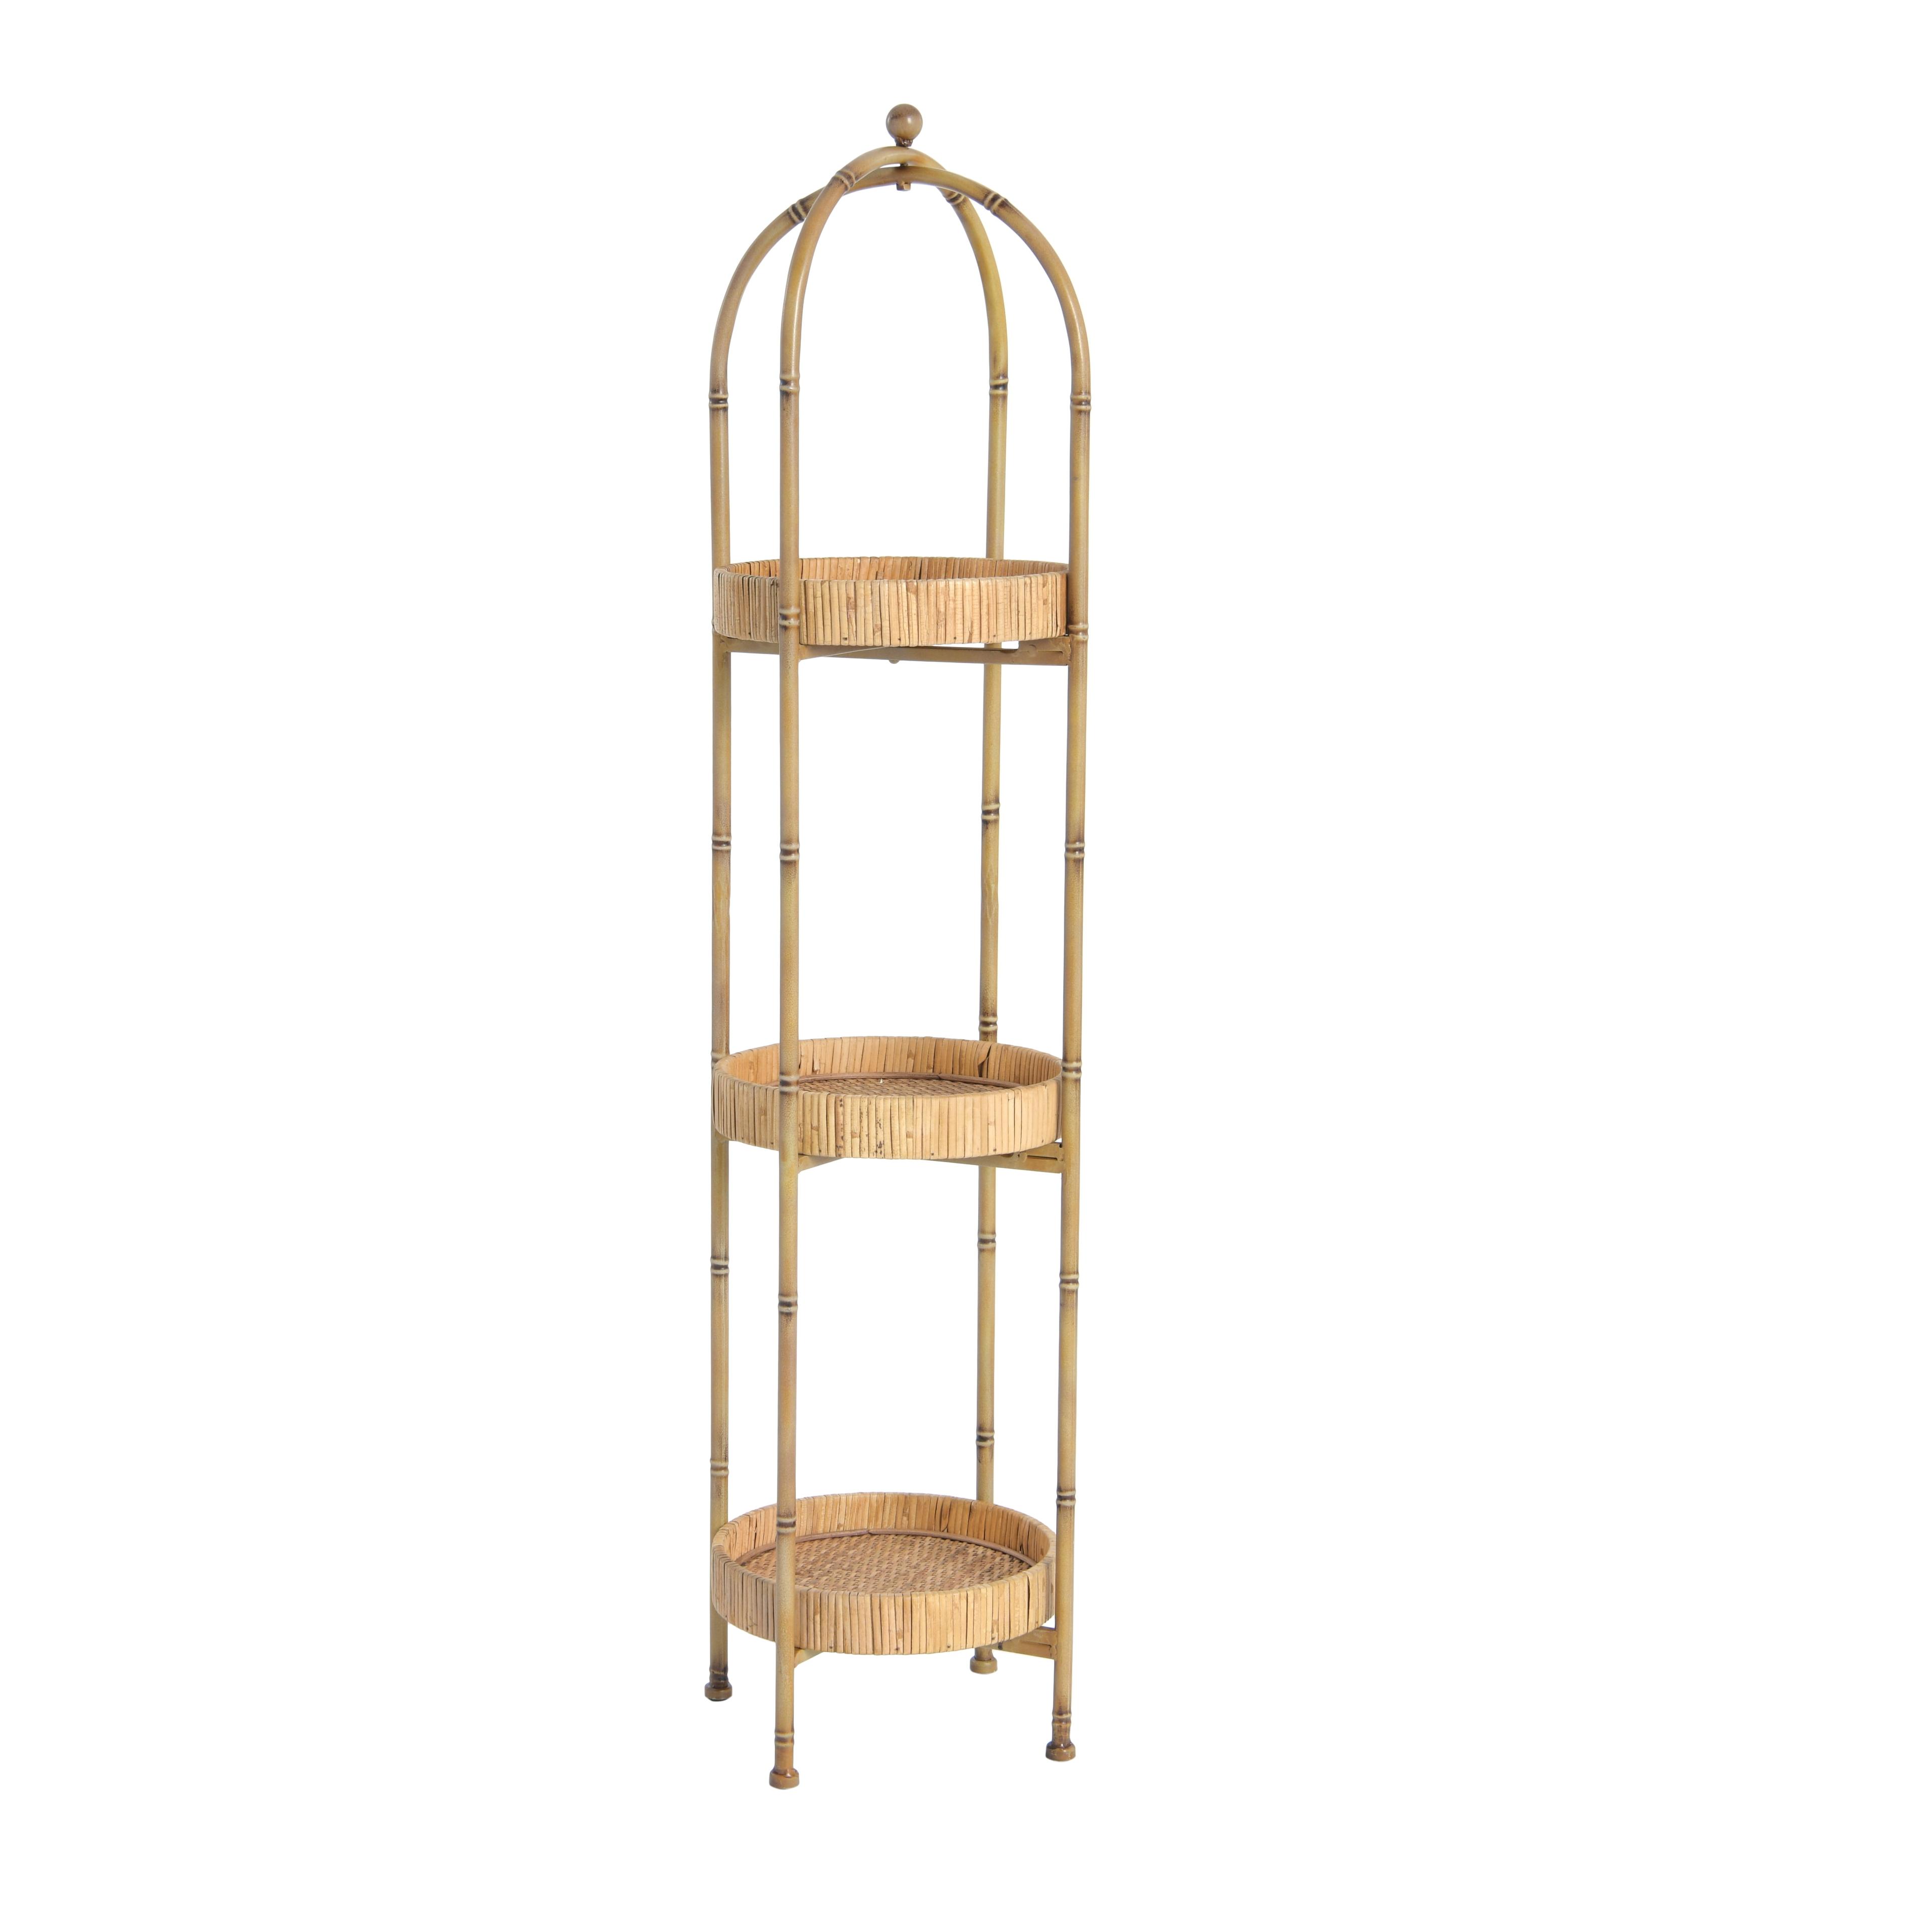 Bamboo-Inspired Metal Shelf with Rattan-Wrapped Trays, Brown